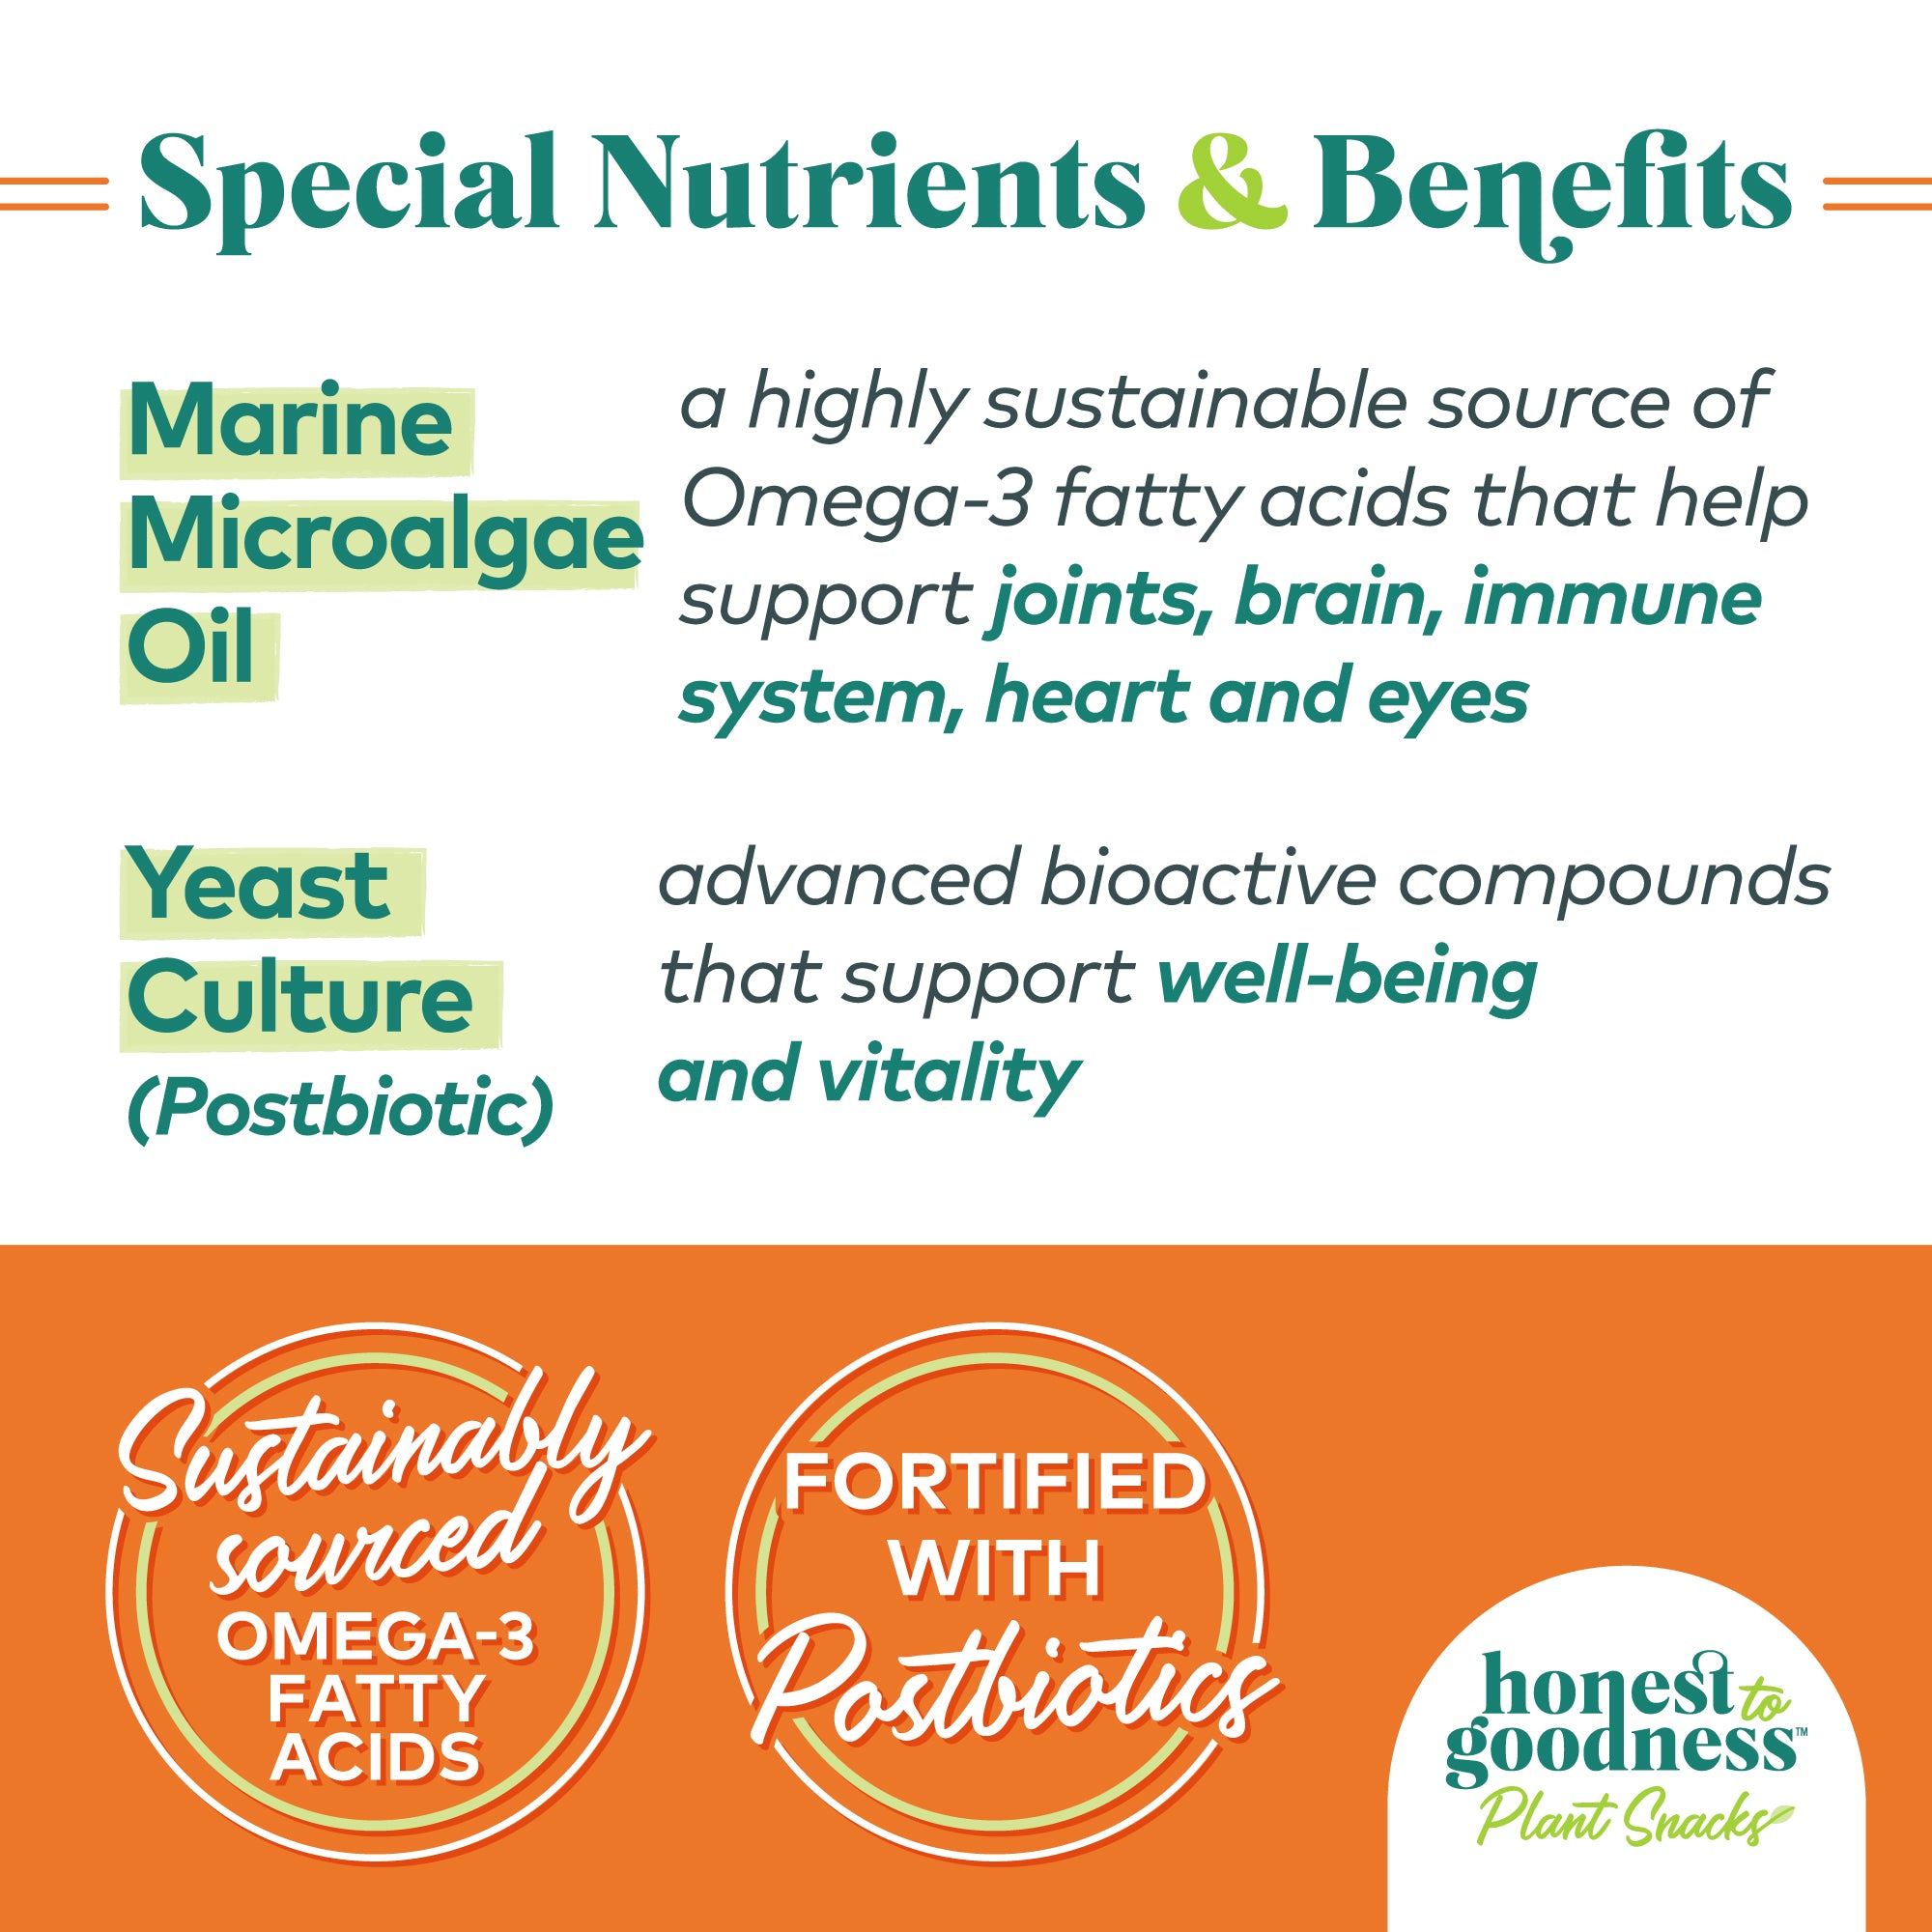 Special nutrients and benefits. Marine microalgae oil which is a highly sustainable source of Omega-3 fatty acids that help support joints, brain, immune system, heart and eyes. Yeast culture (postbiotic) is an advanced bioactive compound that supports well-being and vitality. Honest to Goodness plant snacks are fortified with postbiotics and sustainably sourced omega-3 fatty acids.